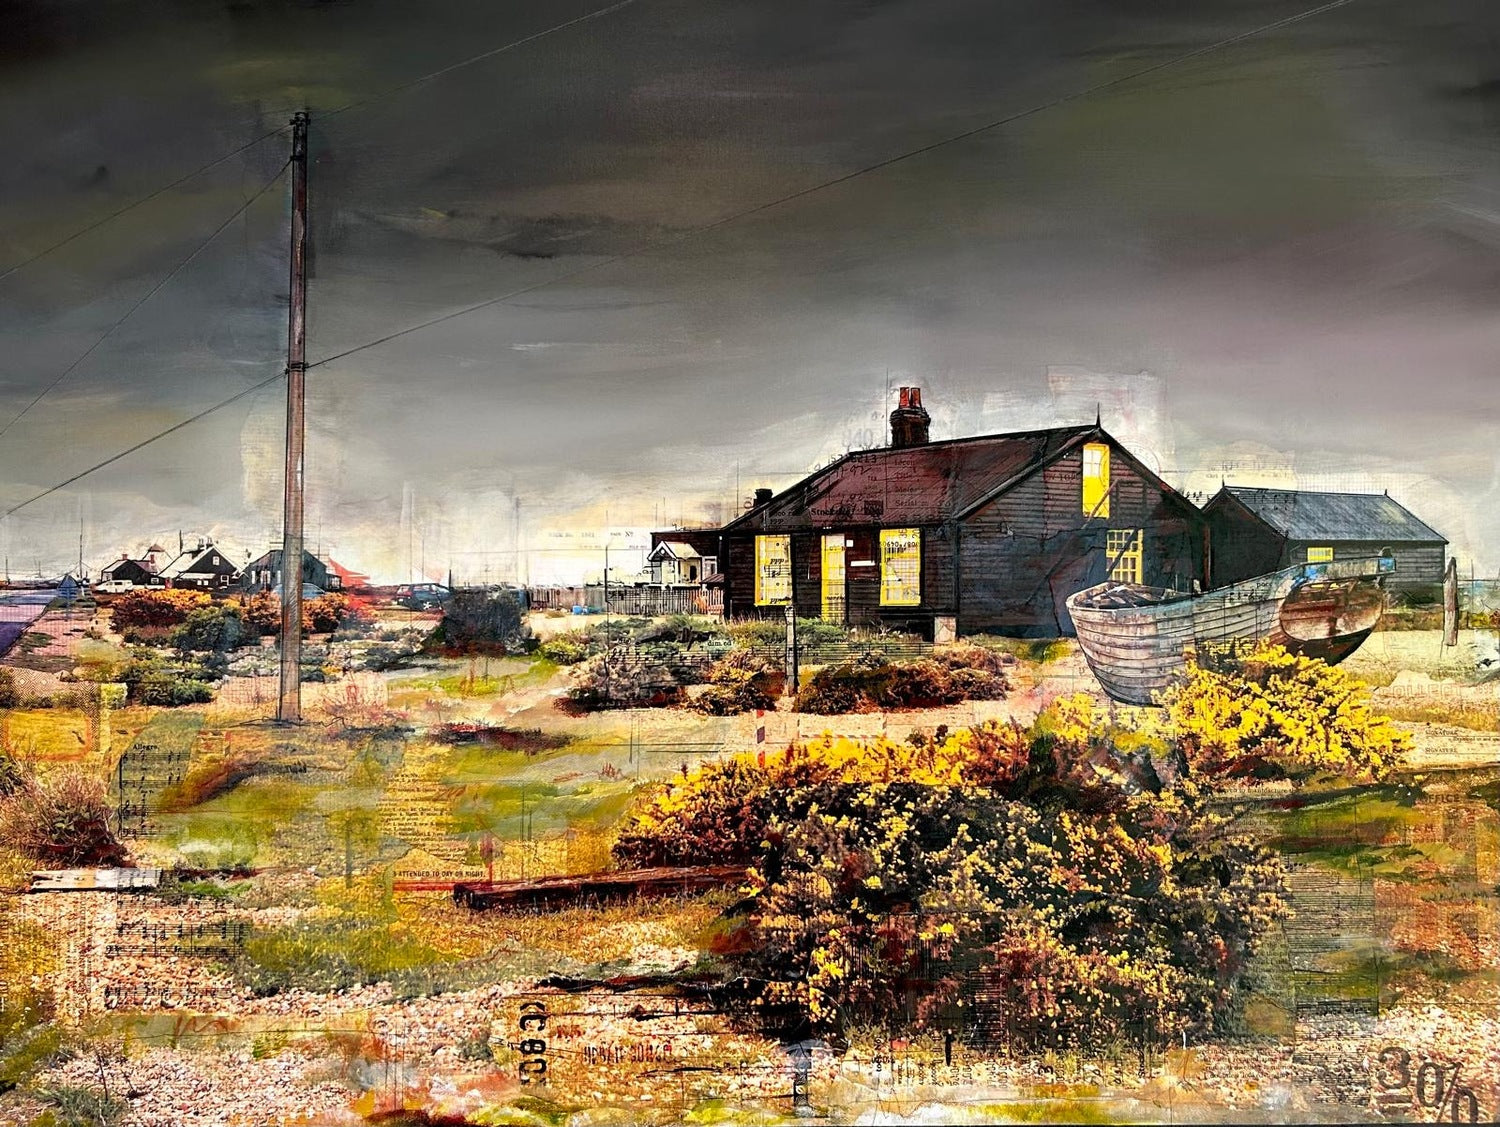 Prospect Cottage, Dungeness Series II